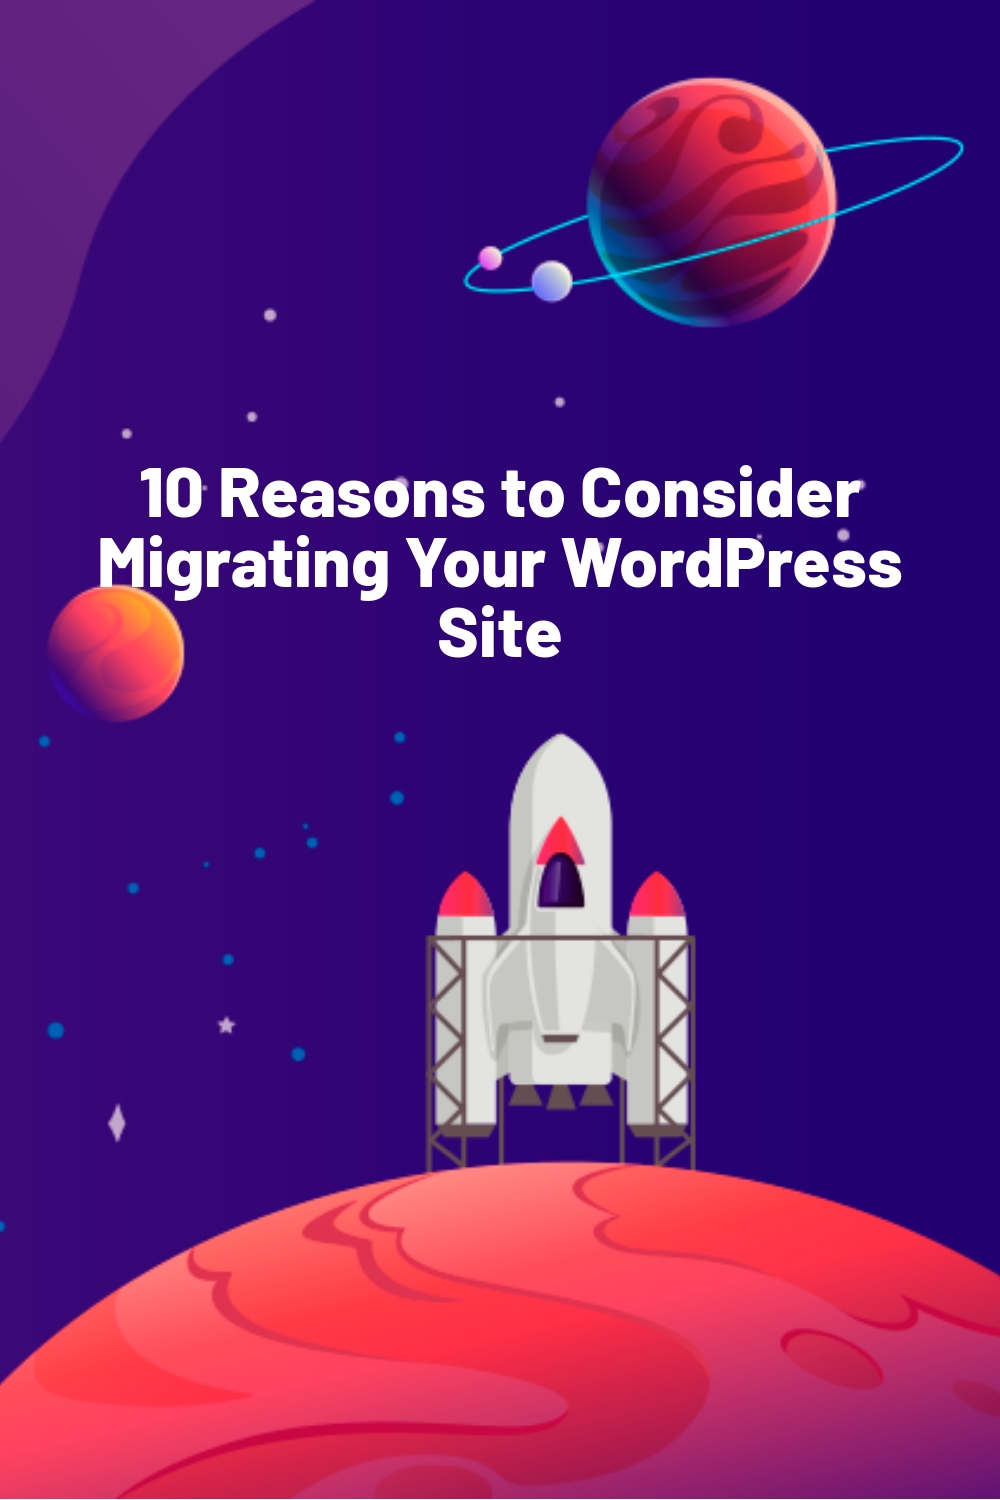 10 Reasons to Consider Migrating Your WordPress Site